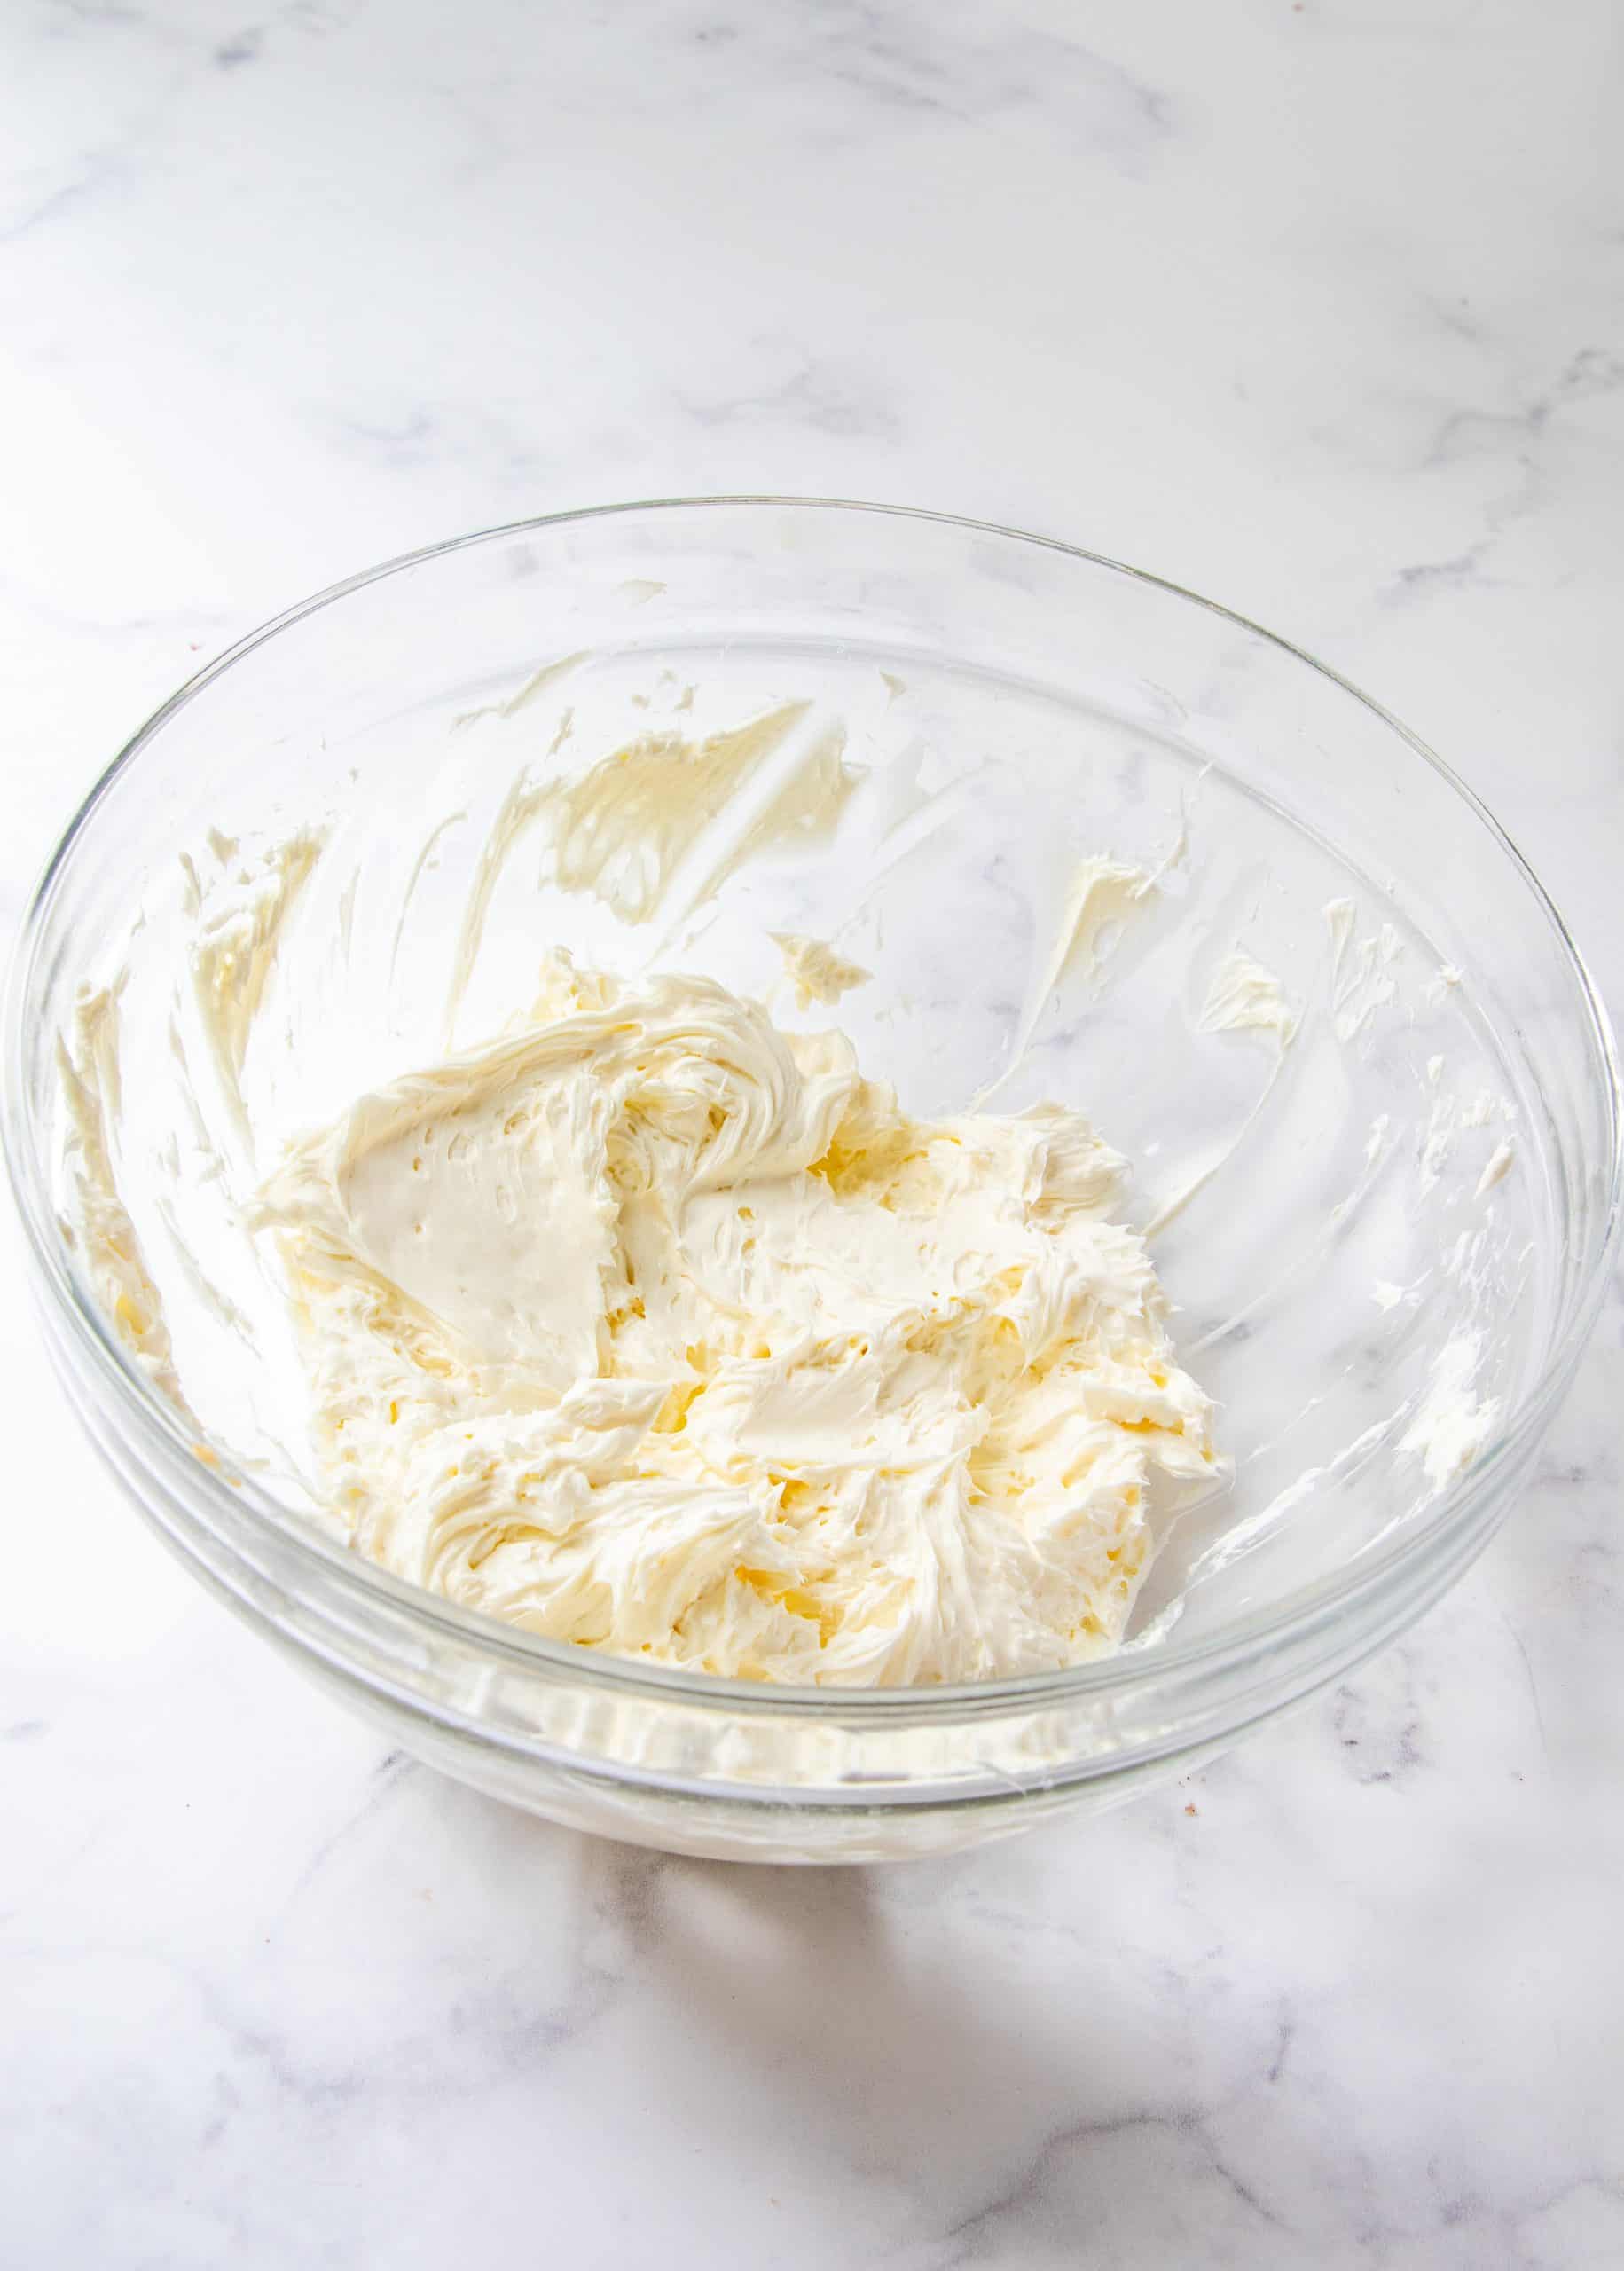 cream cheese beaten until smooth in a bowl.